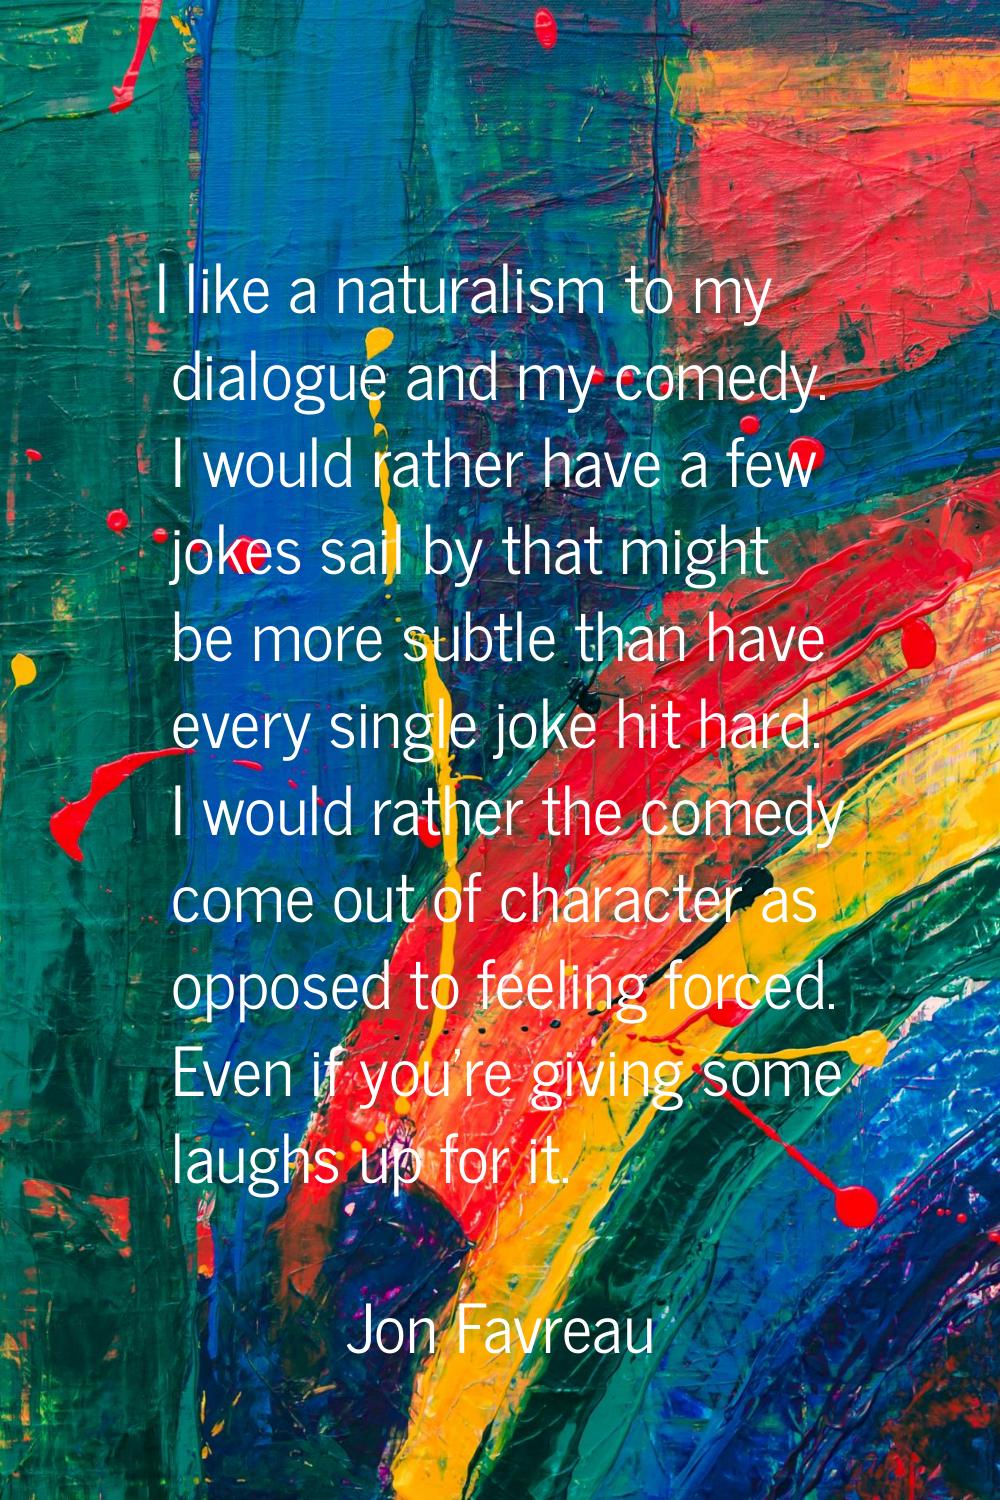 I like a naturalism to my dialogue and my comedy. I would rather have a few jokes sail by that migh